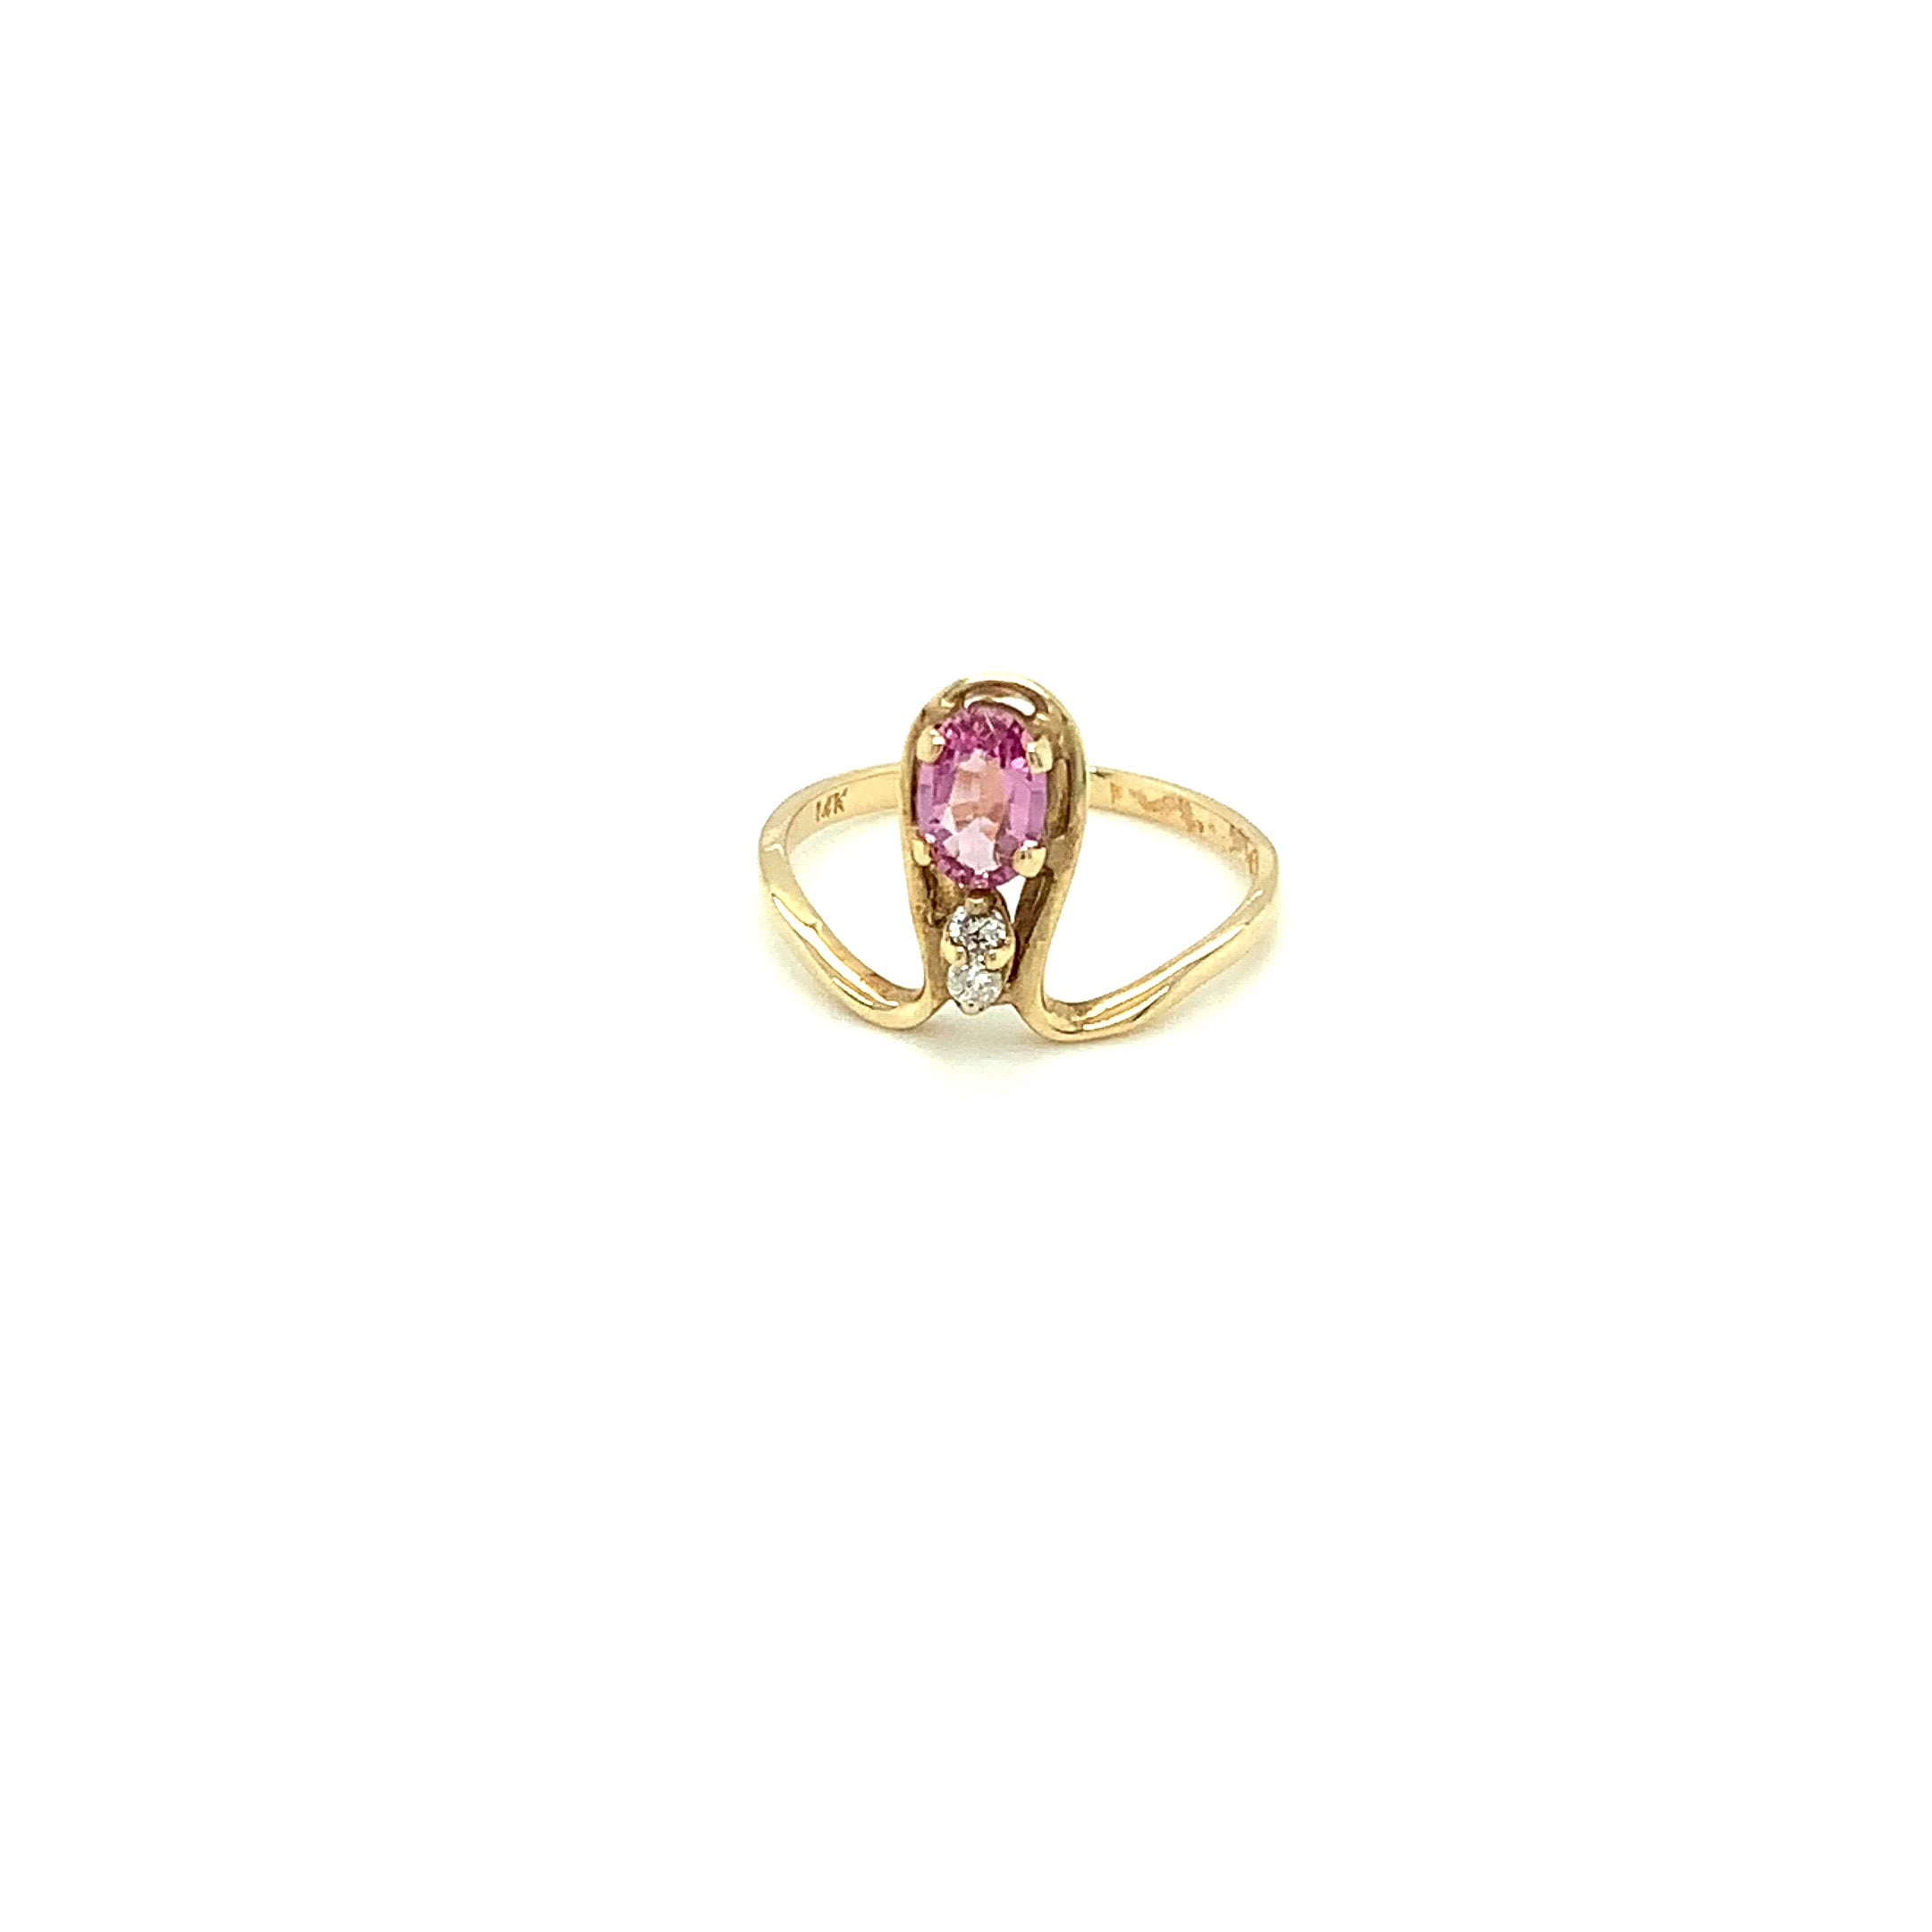 Certified Natural Padparadscha Sapphire & Diamond Ring 14K Solid Gold .60tcw Vintage Ring Statement Ring Gemstone Ring Fine Estate Jewelry